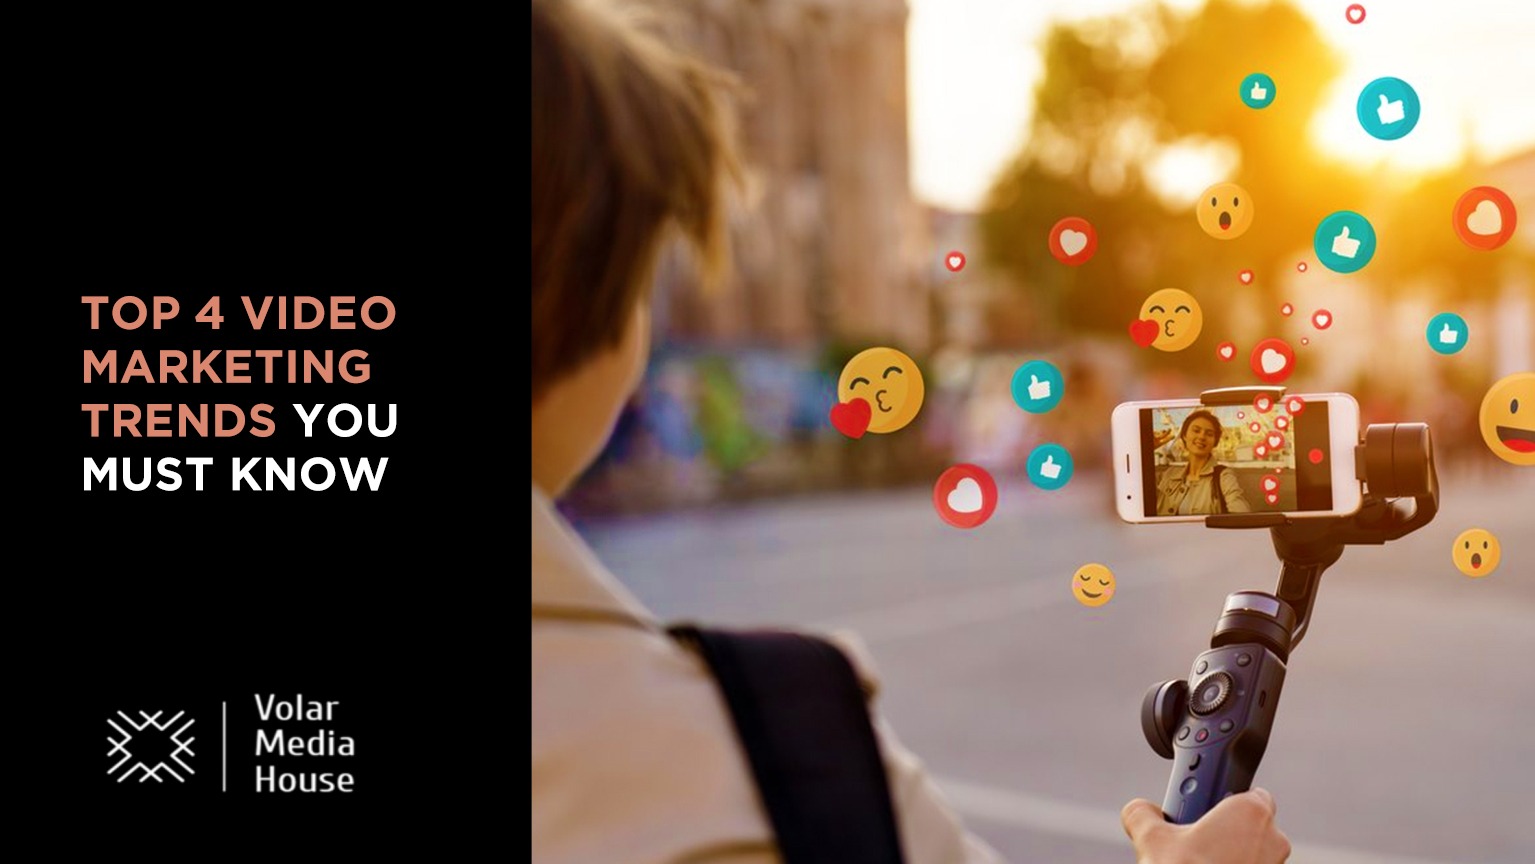 Top 4 Video MarketingTrends You Must Know